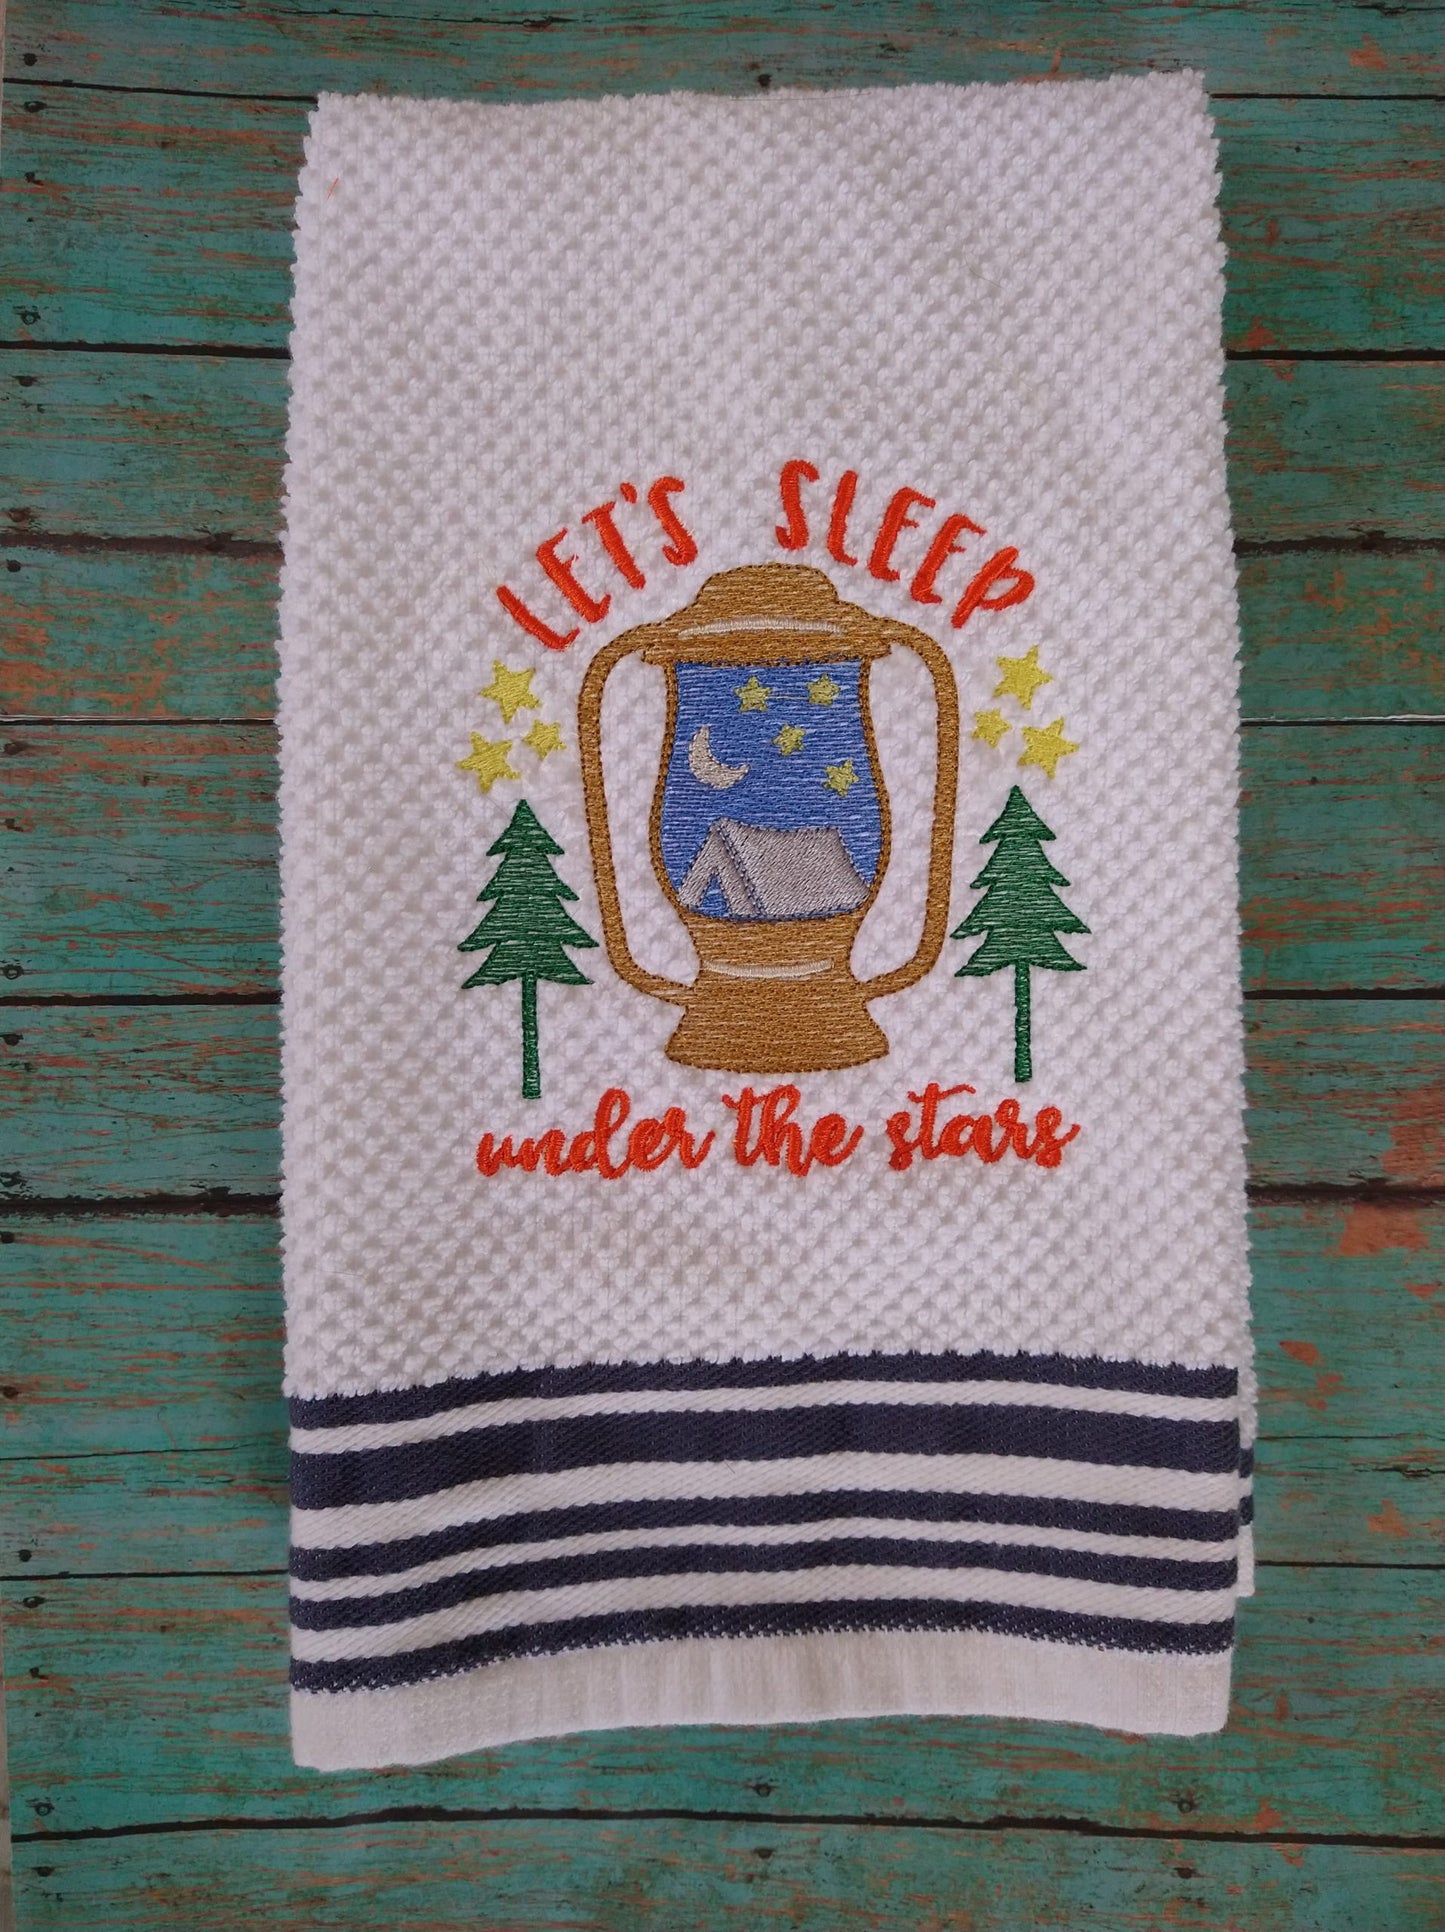 Let's Sleep Under The Stars - 3 sizes- Digital Embroidery Design